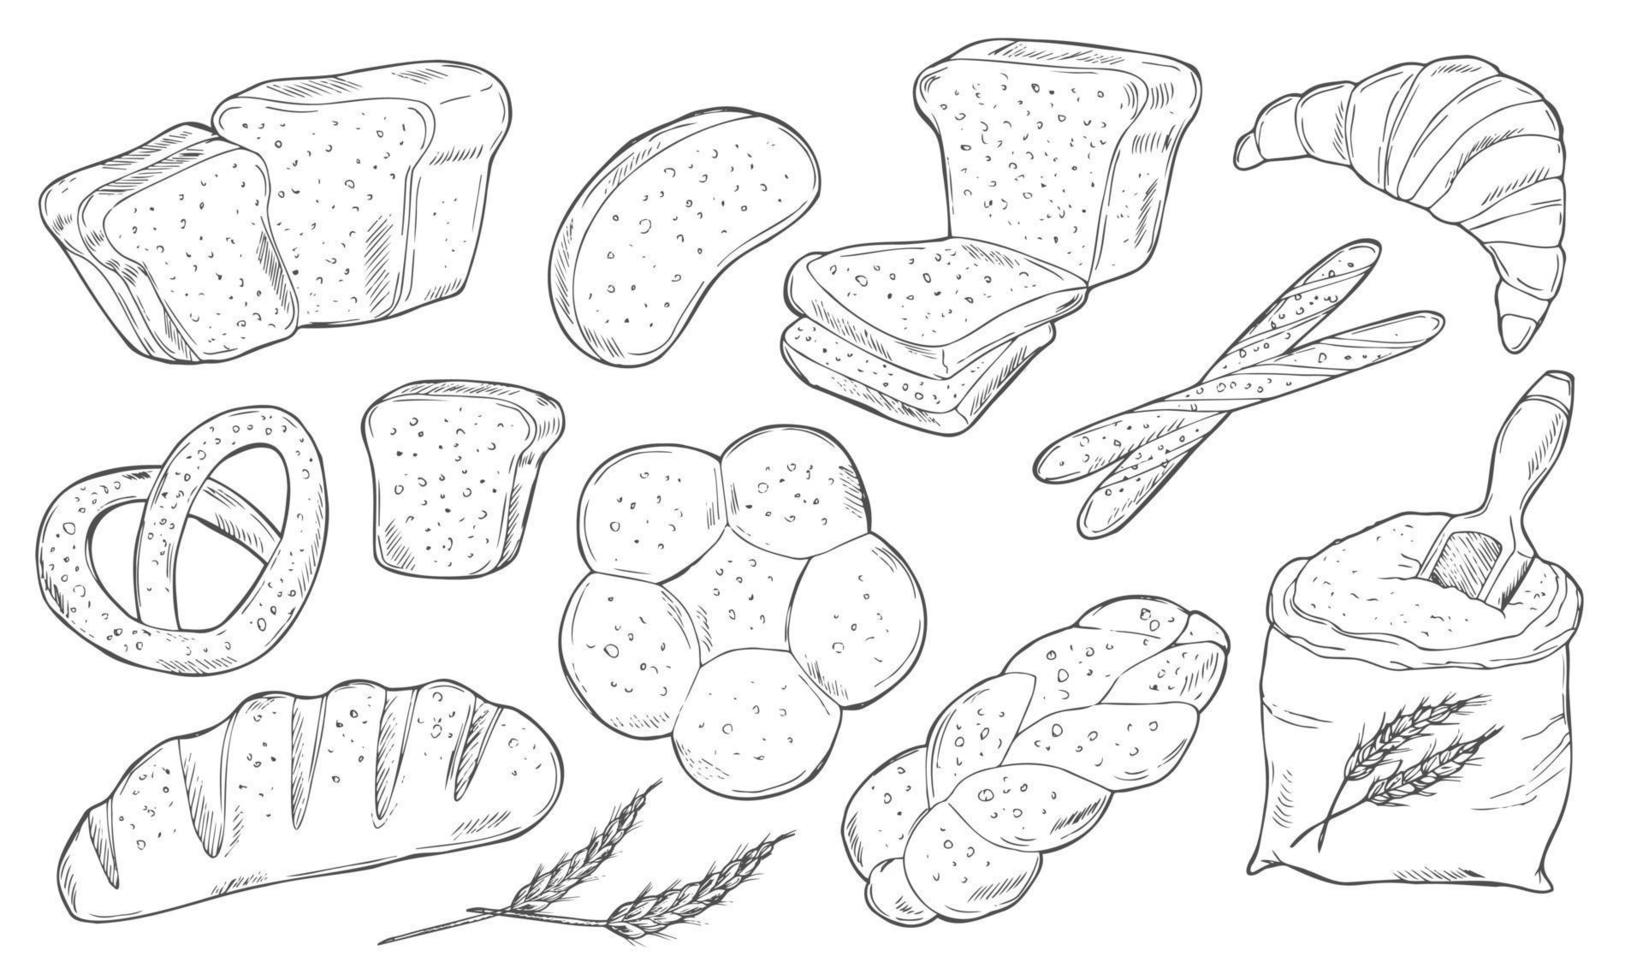 Bread vector hand drawn set illustration. Other types of wheat, flour fresh bread. Gluten food bakery engraved collection. Black bake organic food isolated on white background.